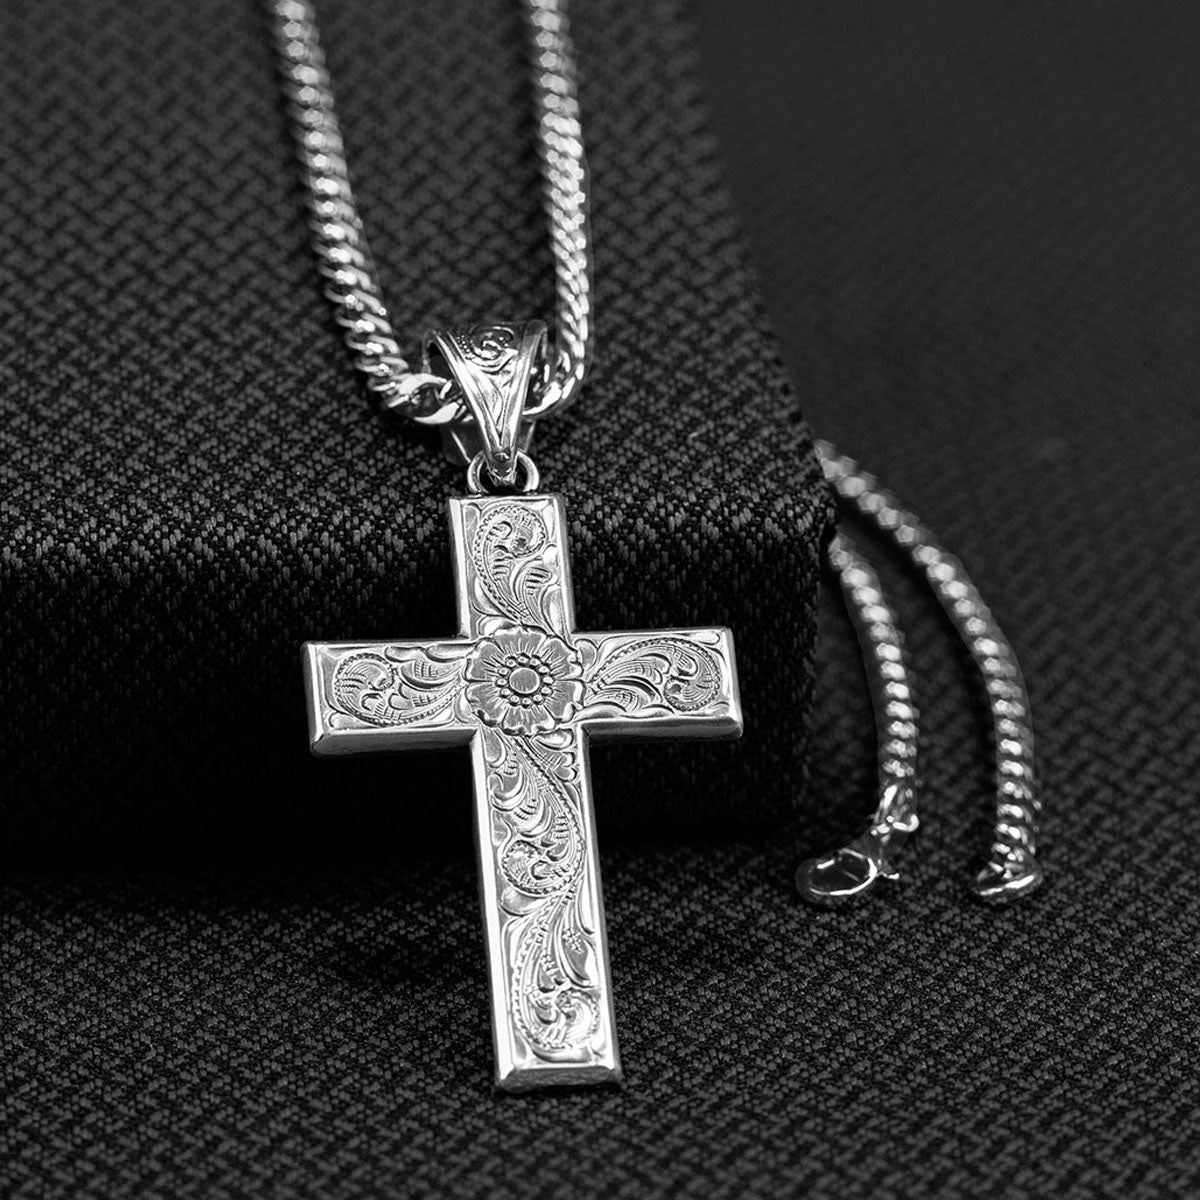 M&F Men's Floral Embossed Silver Cross Necklace 32106